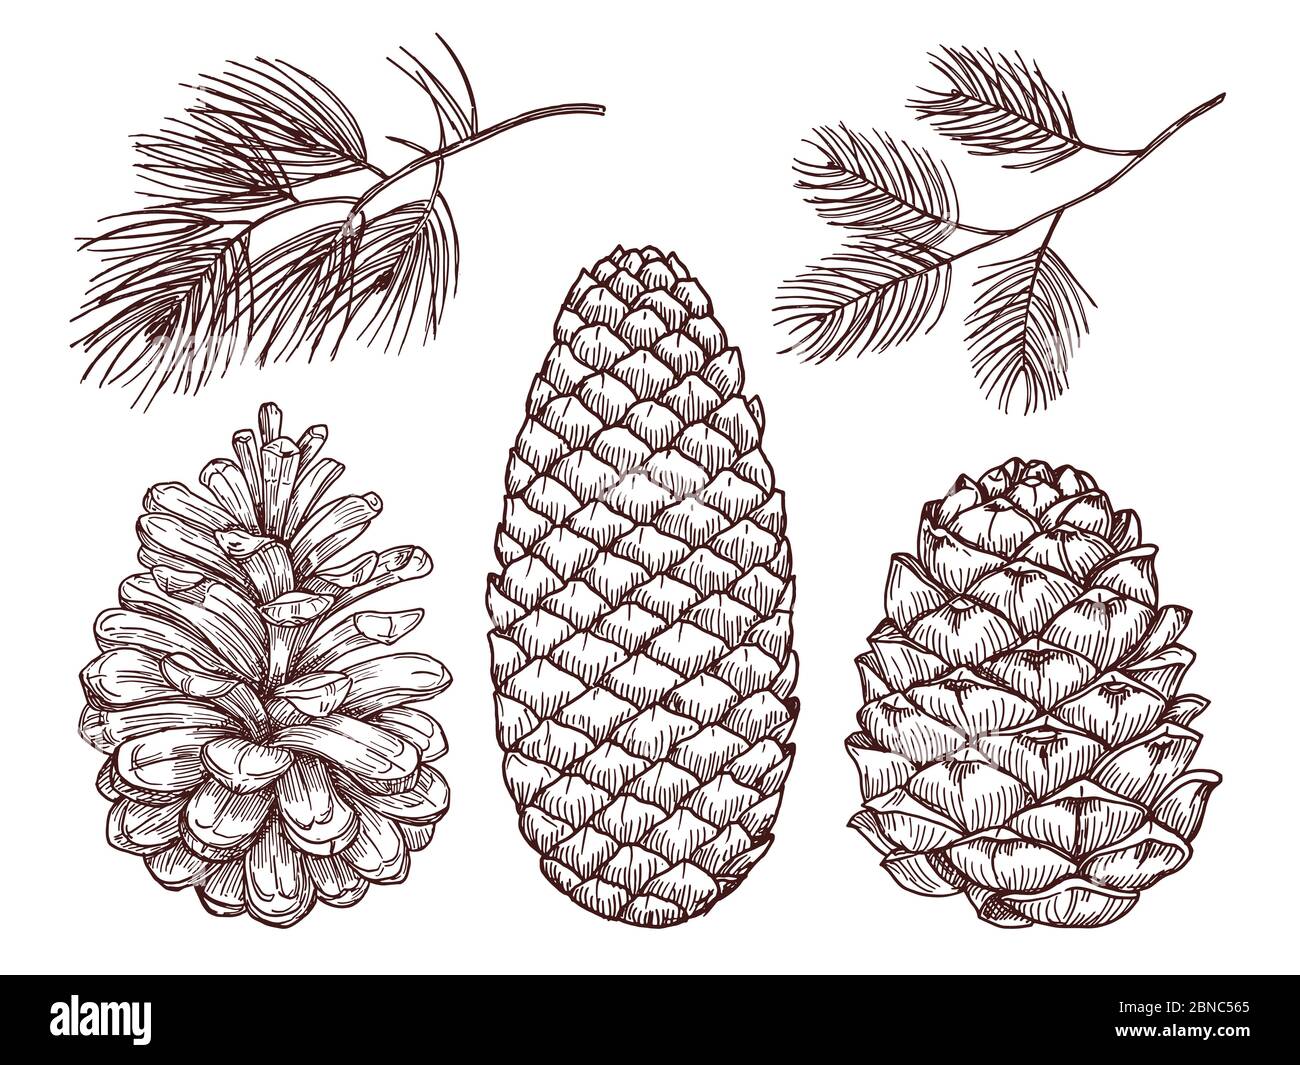 Hand drawn forest vector elements. Sketched pine branches and pinecones isolated on white background illustration Stock Vector